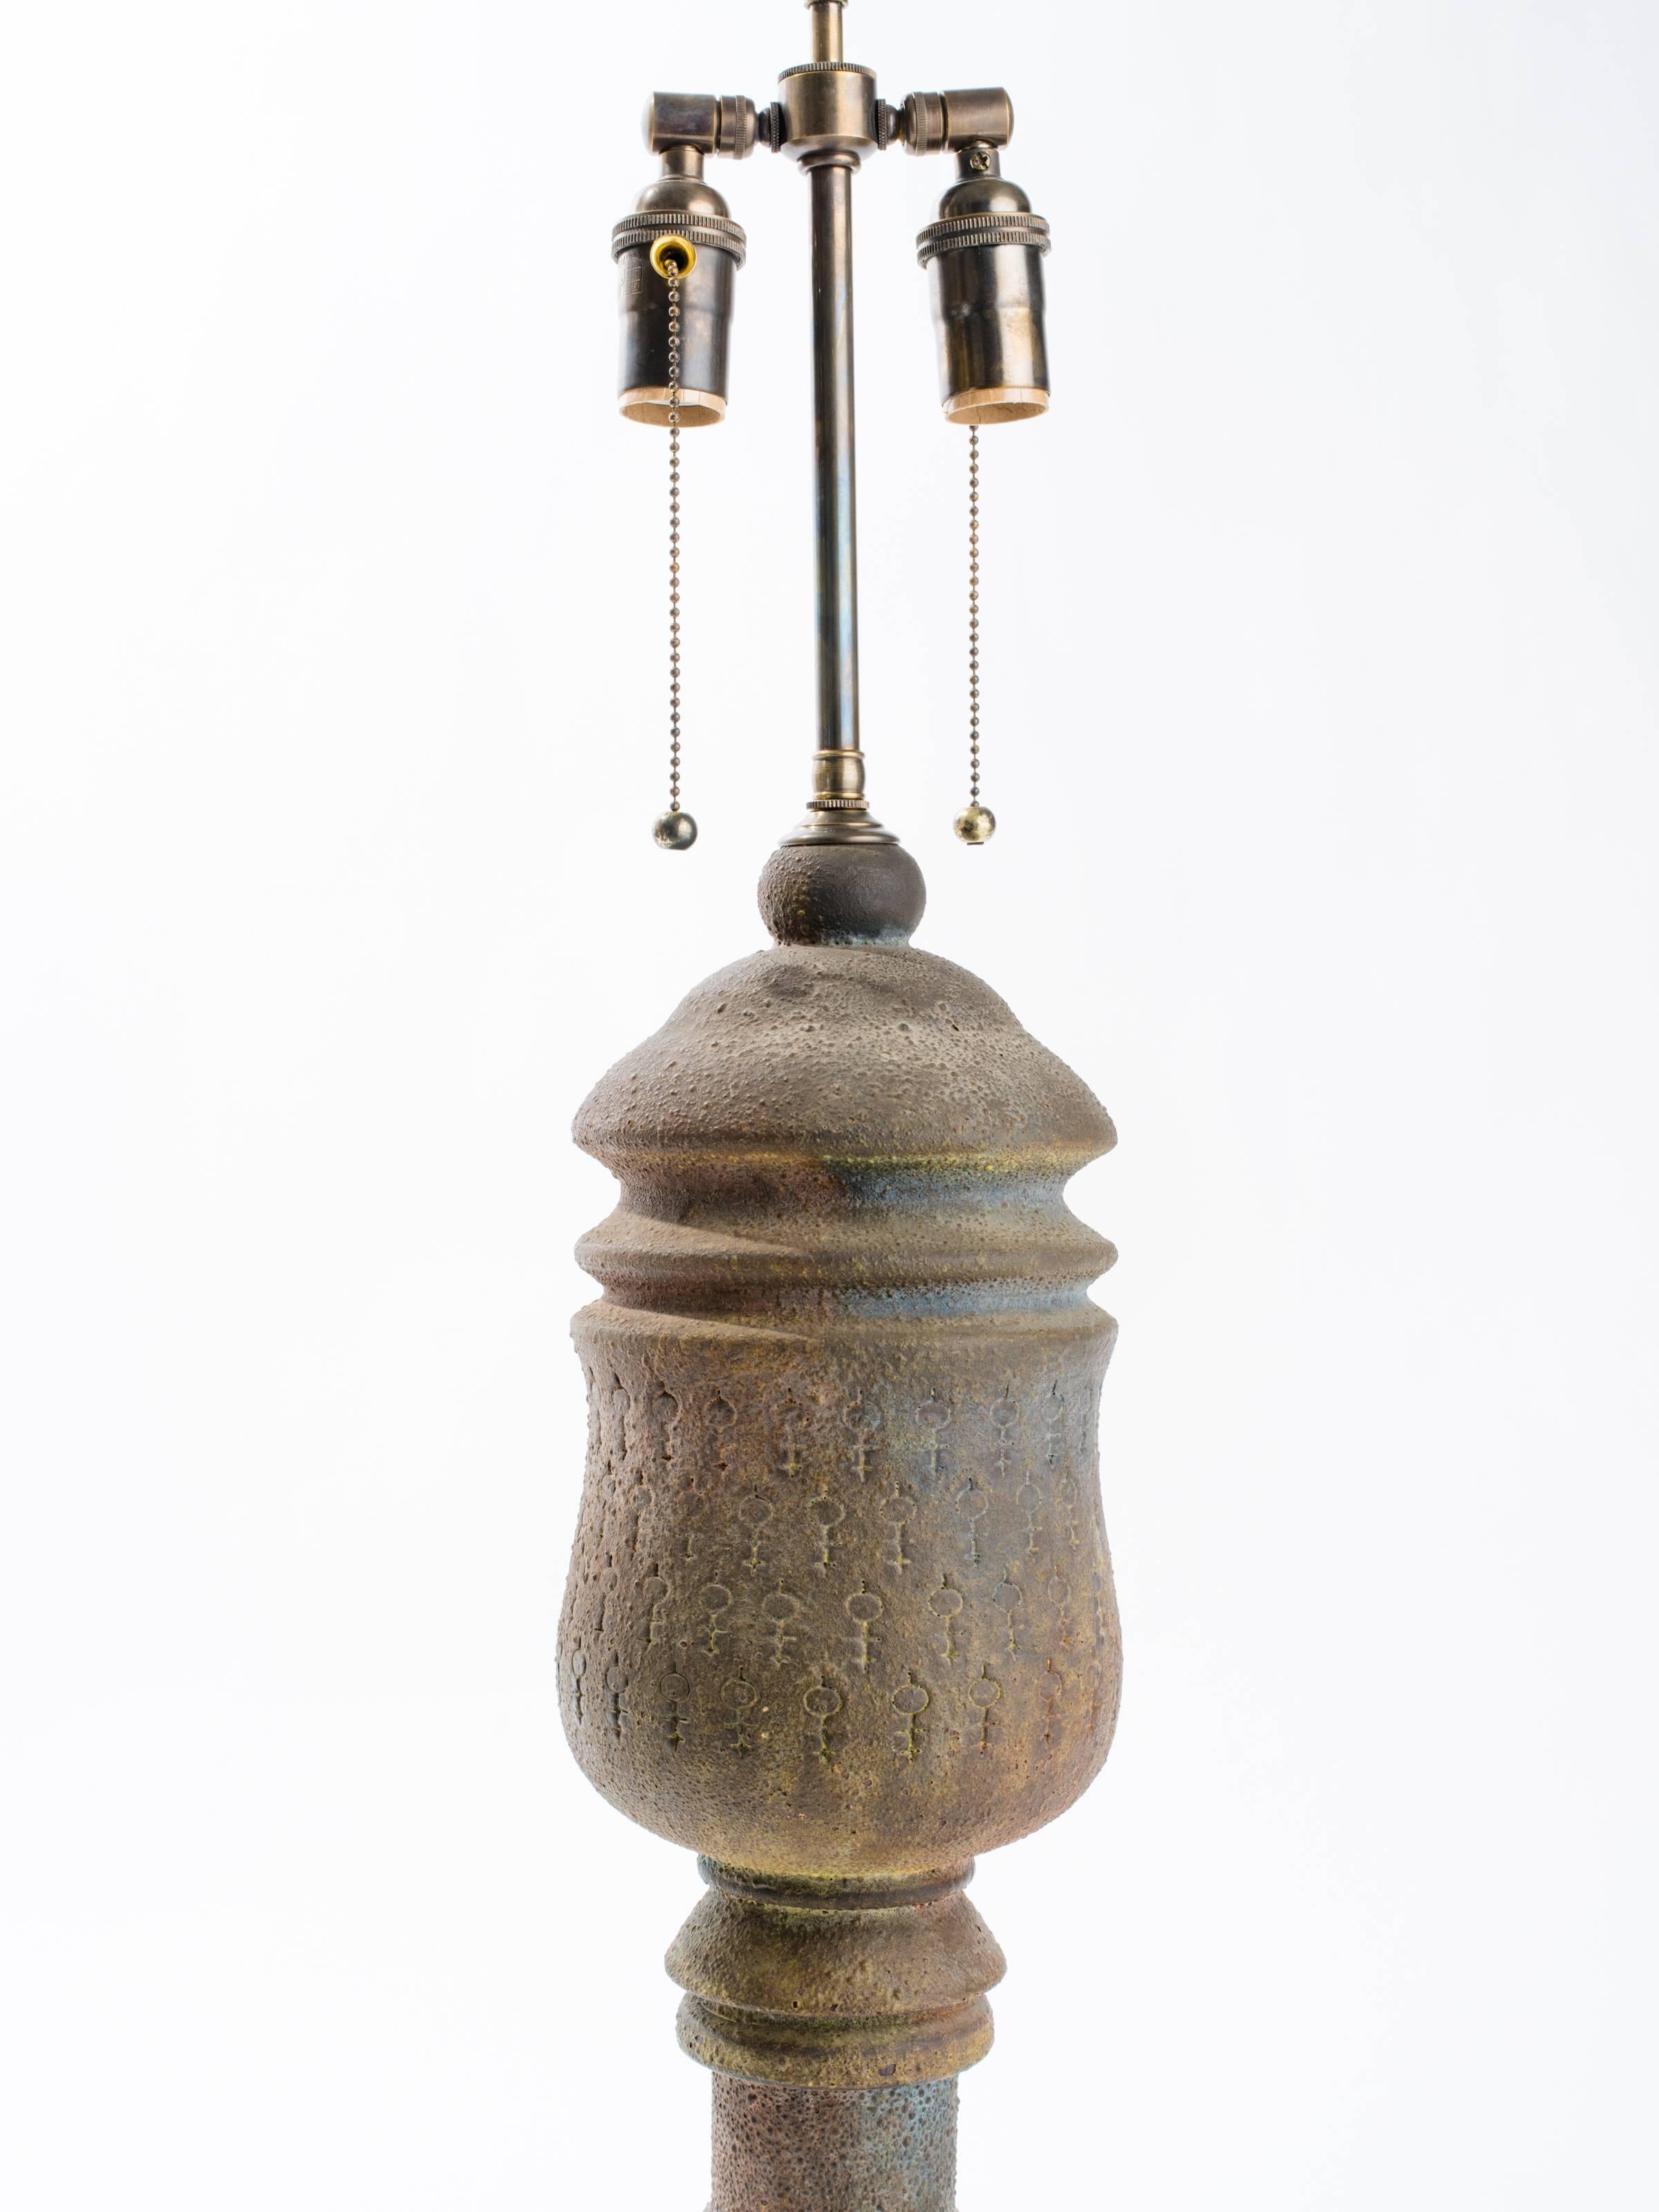 Volcanic glaze pottery lamp with incised design.
Rewired with new pull chain sockets.
Solid wood base.